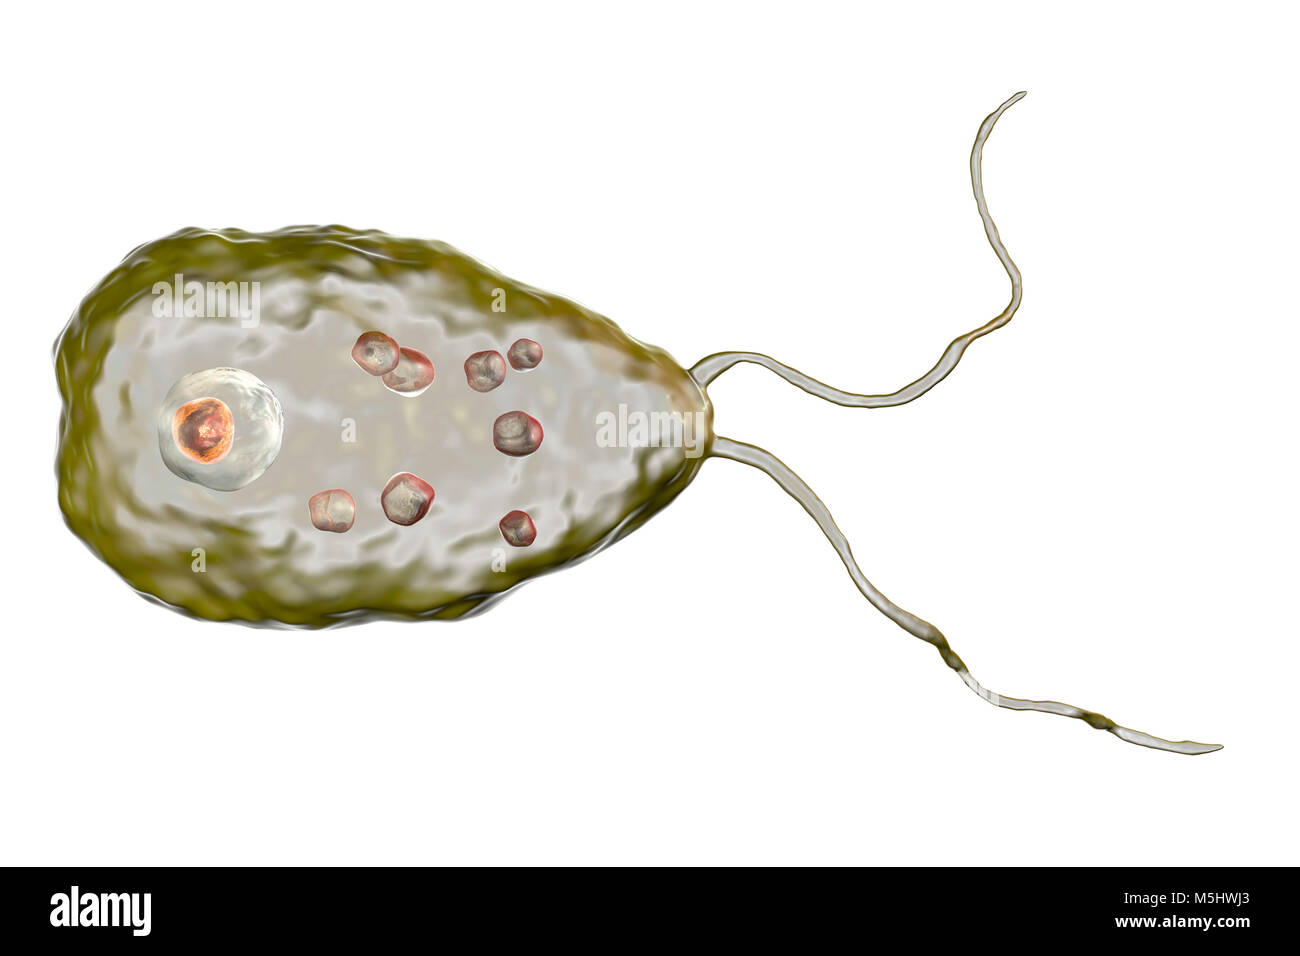 Brain-eating amoeba Naegleria fowleri protozoan in flagellate form, computer illustration. This organism is an opportunistic pathogen of humans, causing meningoencephalitis (inflammation of the brain and its surrounding membranes) when inhaled, often by children swimming in fresh water. Headaches, vomiting, sensory disturbance and a fatal coma may occur if the victim is not treated. Treatment is with antiprotozoal drugs. Infectious stage for humans are trophozoites and the flagellate form. Stock Photo